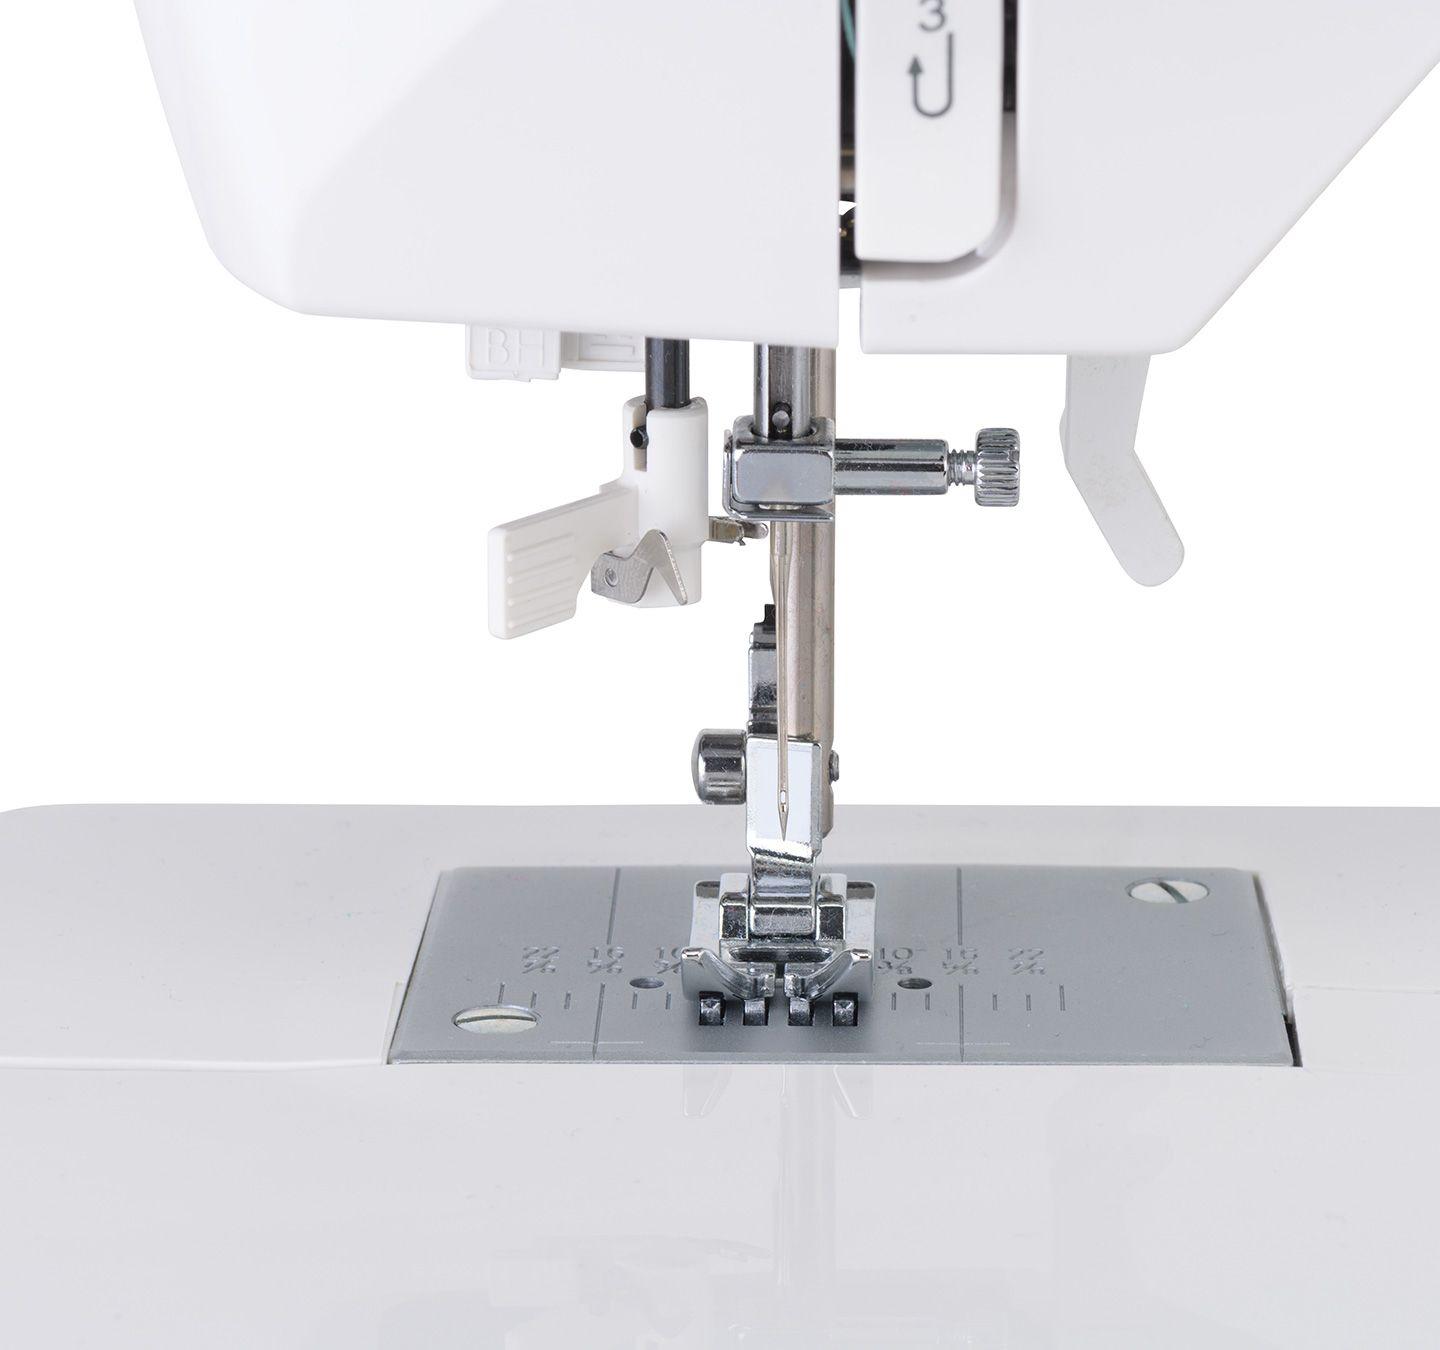 SINGER C5205-CR sewing machine Automatic sewing machine Electric